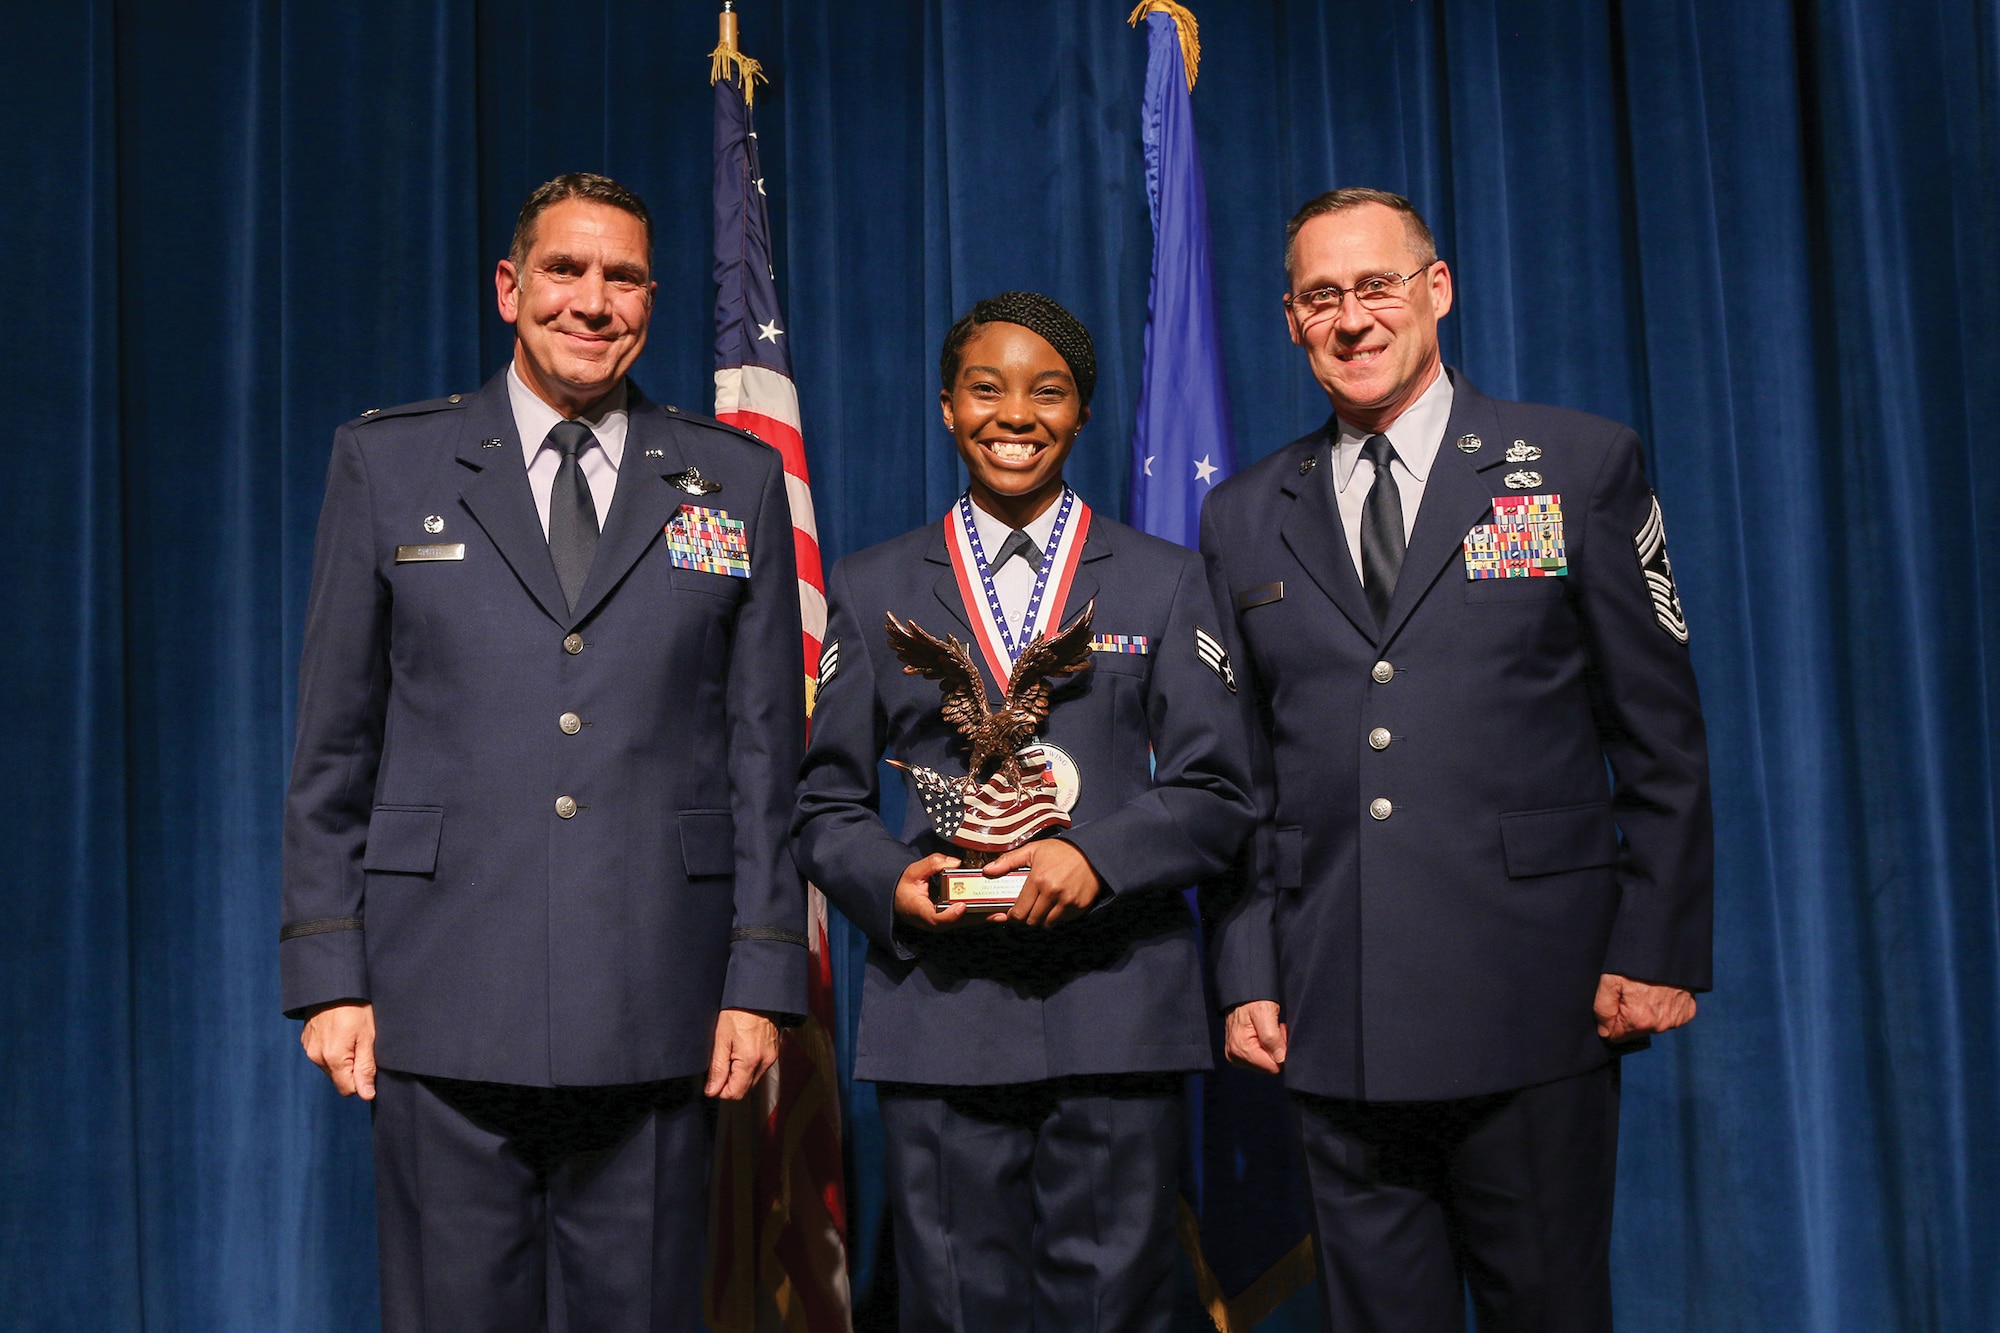 Senior Airman Cicely McWhorter, 87th Aerial Port Squadron, accepts the 2021 Airman of the Year award during the 445th Airlift Wing's Annual Awards Recognition Ceremony April 2, 2022. The event recognized 34 nominees. Col. Raymond Smith, 445th AW commander and Chief Master Sgt. Christopher Williams, presented medallions to nominees and a trophy to the winners. Mrs. Stephanie Smith, 445th Airlift Wing Key Spouse Mentor and wife of Col. Smith, presented the spouse and youth nominees their medallions and trophies to the winners.